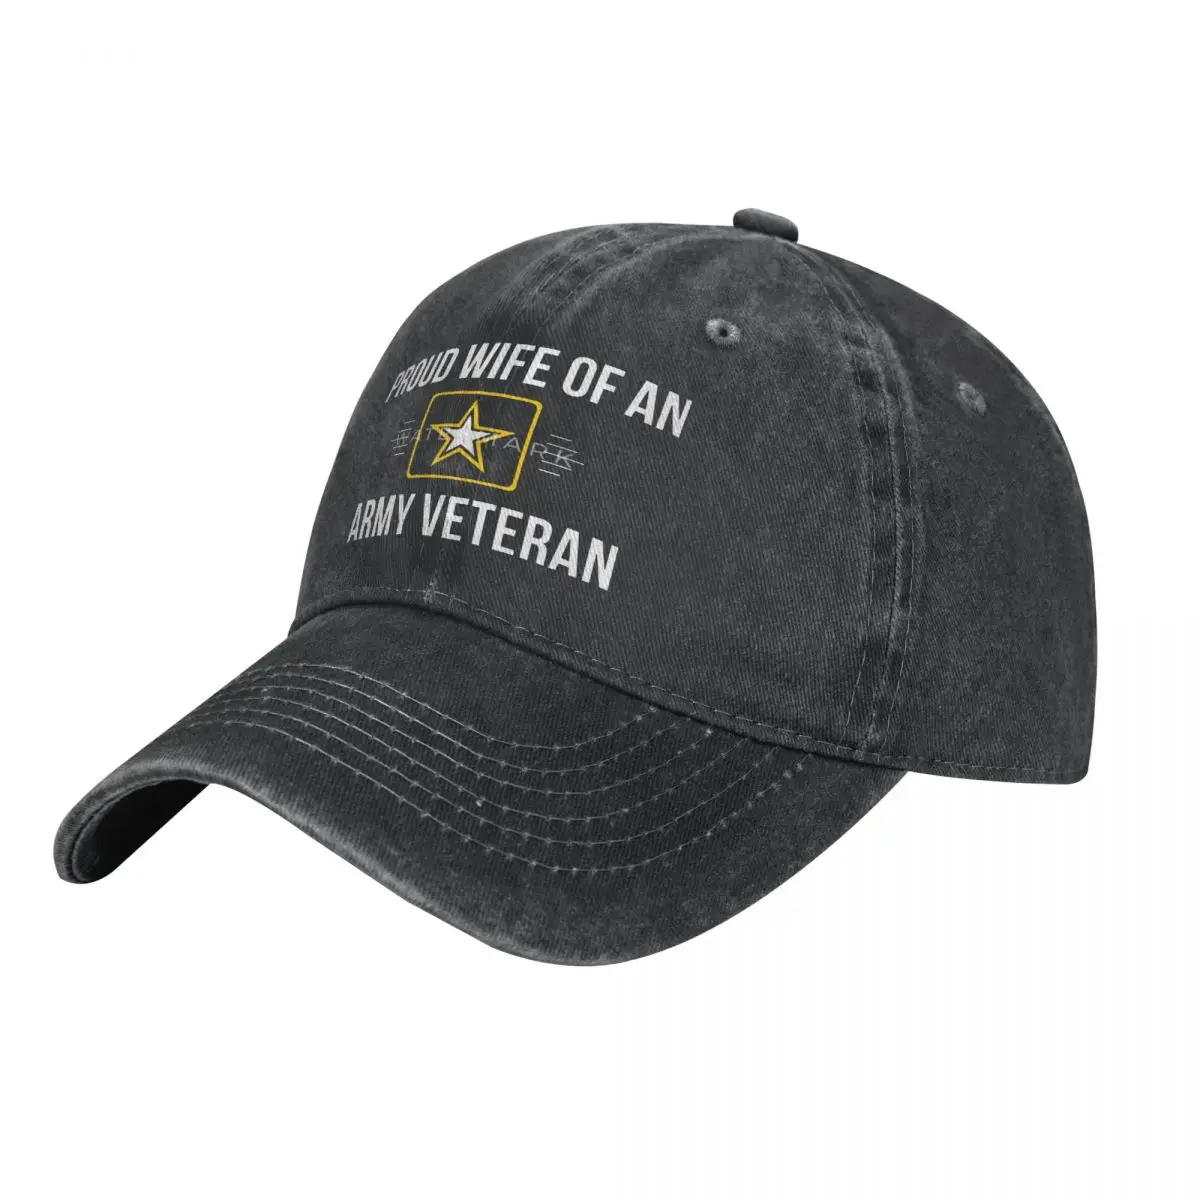 

Proud Wife Of An Army Veteran Casquette, Cotton Cap Customizable Hat Wicking Sports Nice Gift